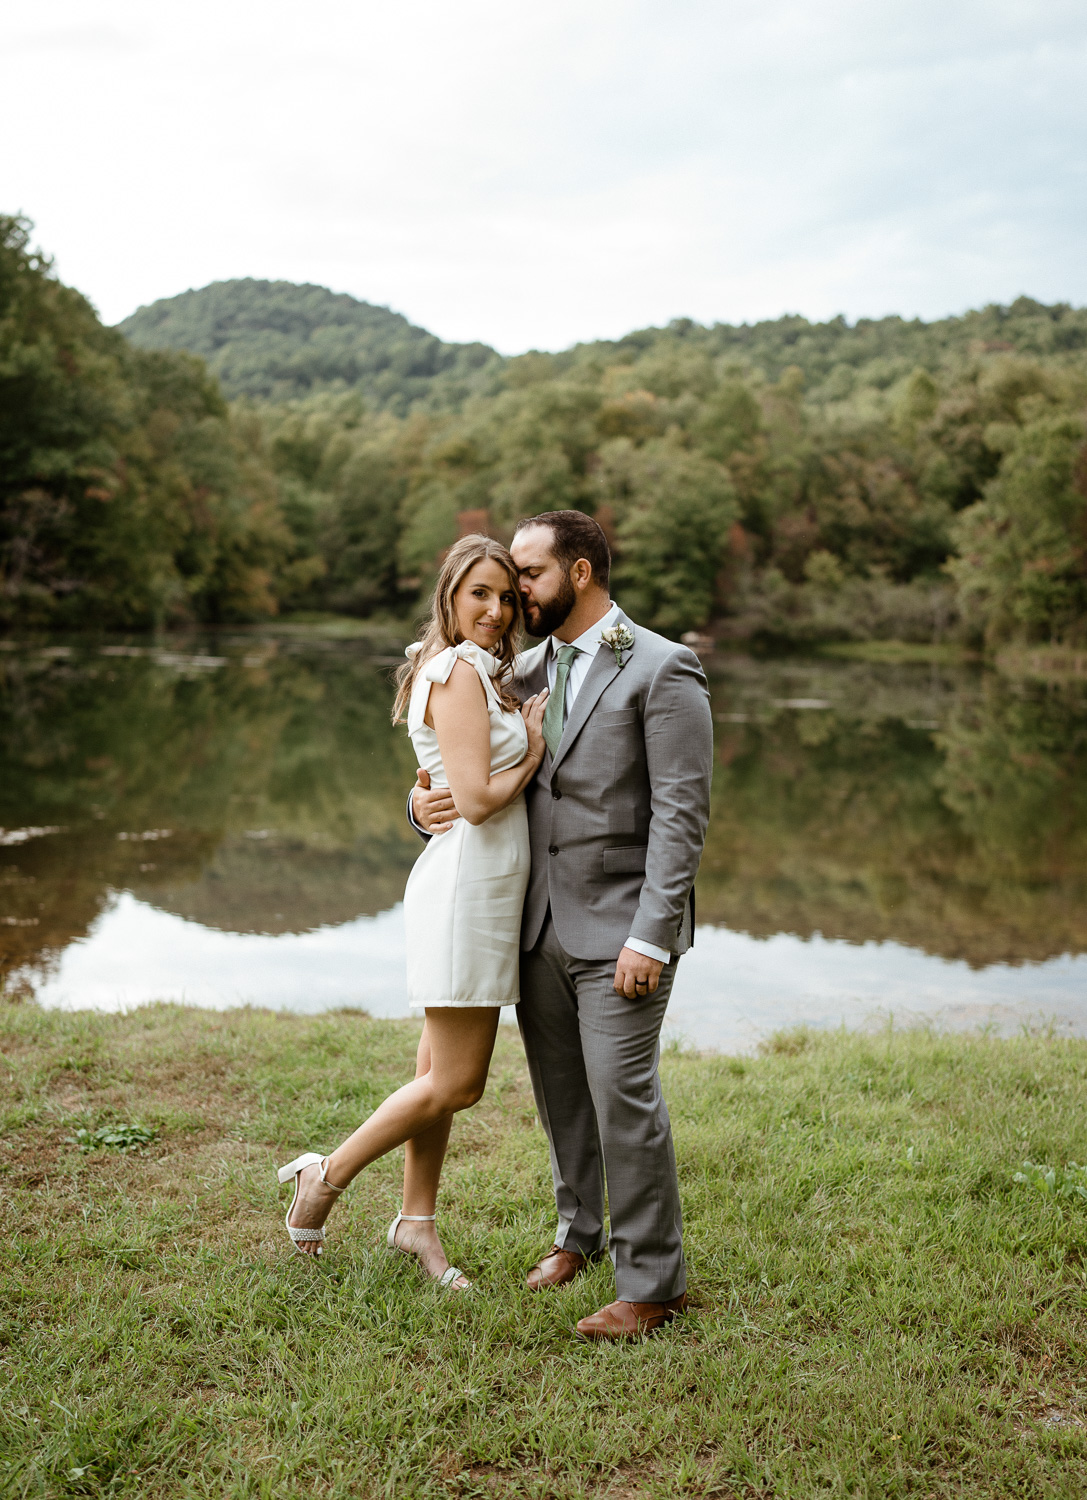 Bride and groom nuzzle in close in front of a mountain lake on their Asheville elopement day